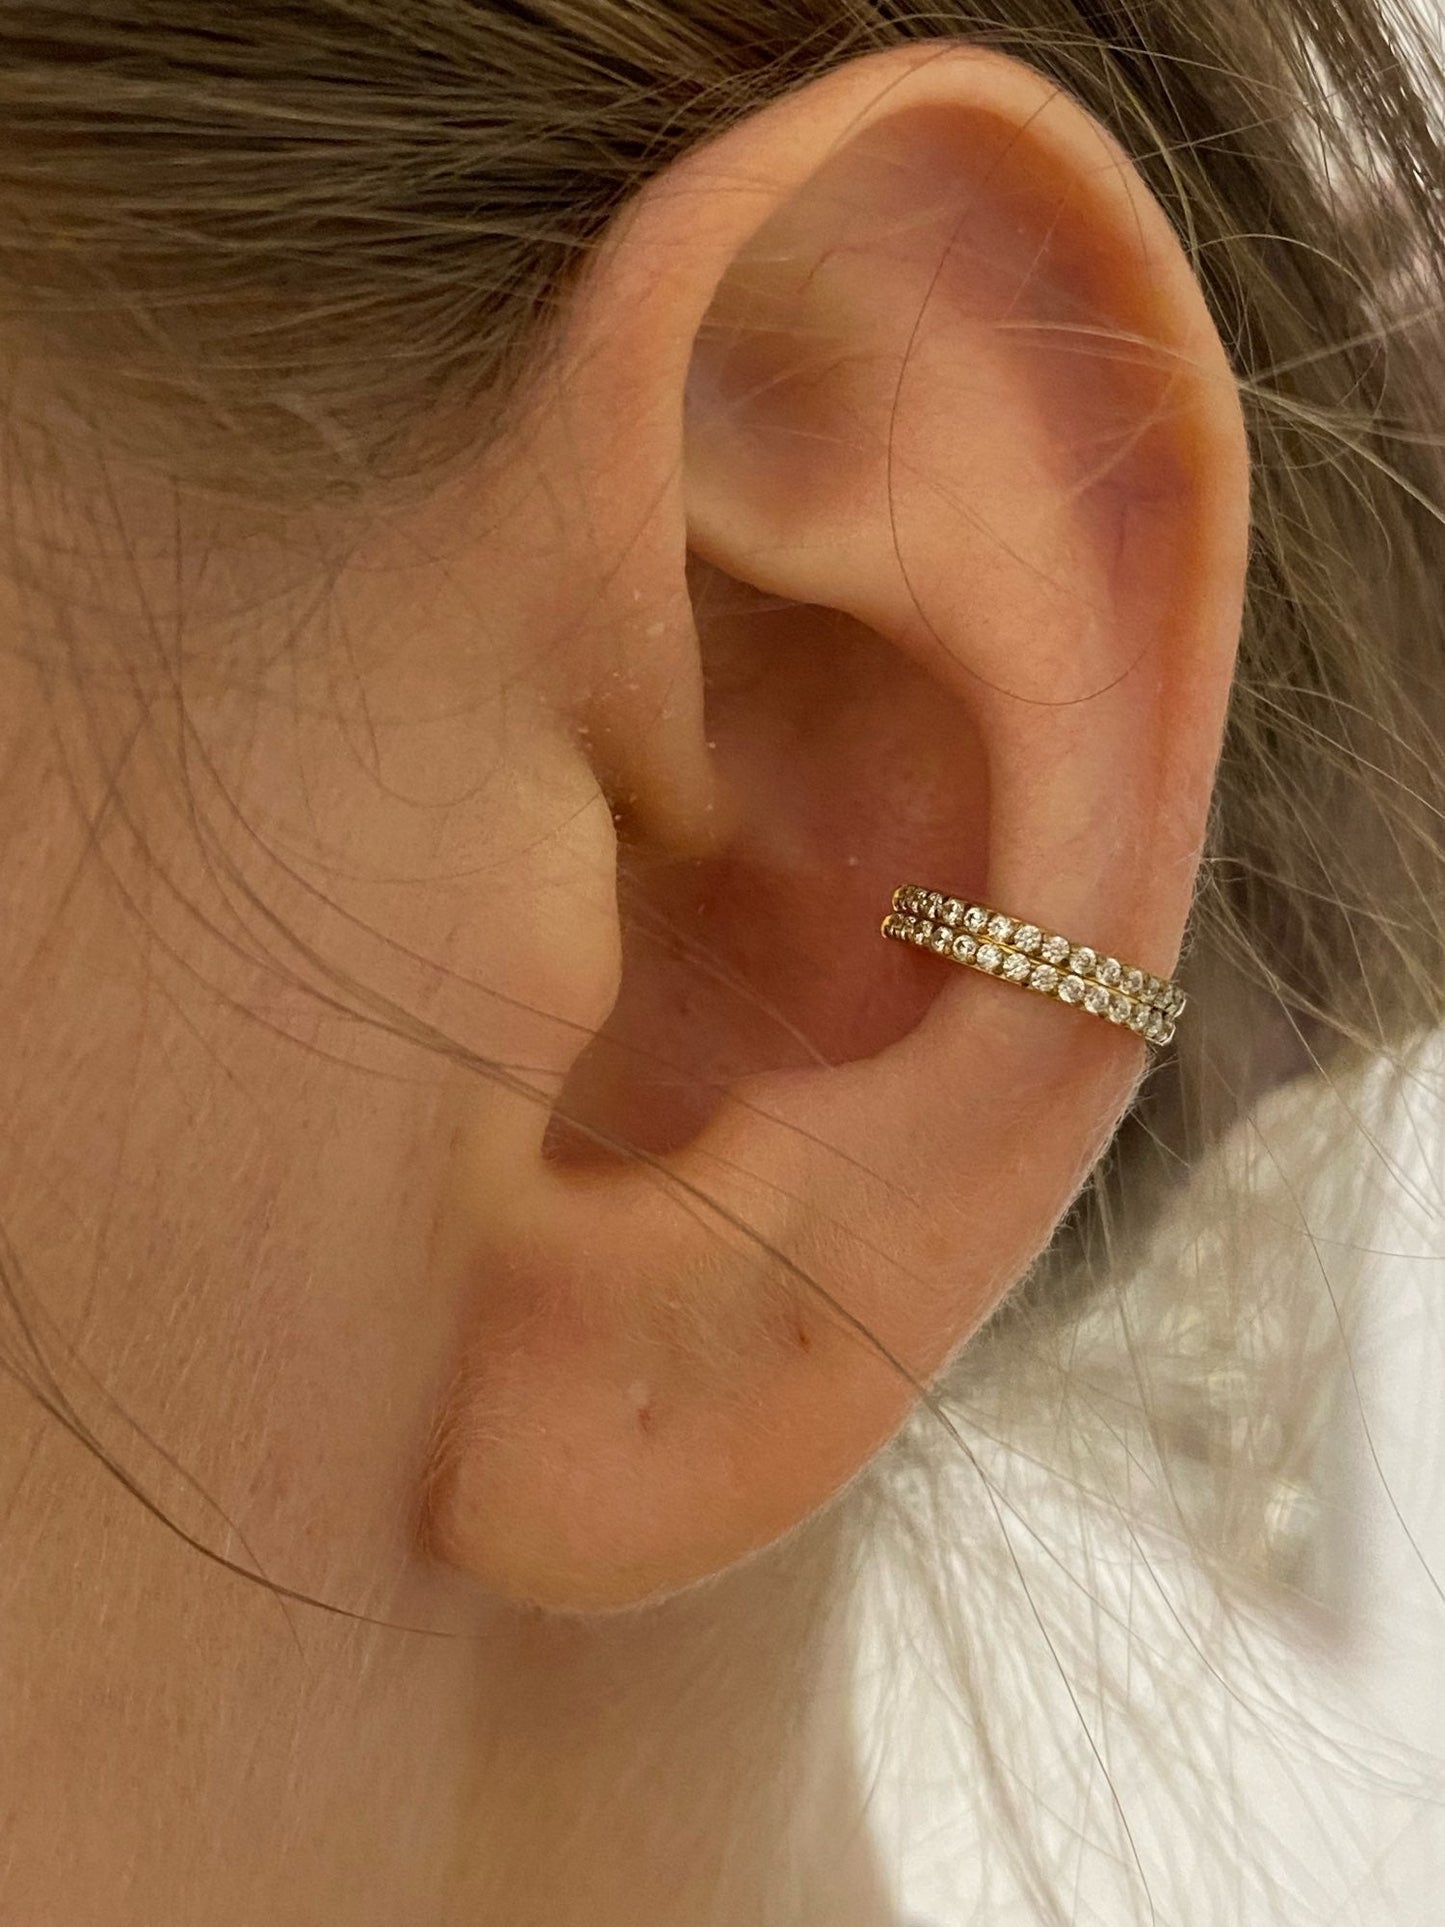 Overview of the gold Double Hoop Rook Piercing clicker